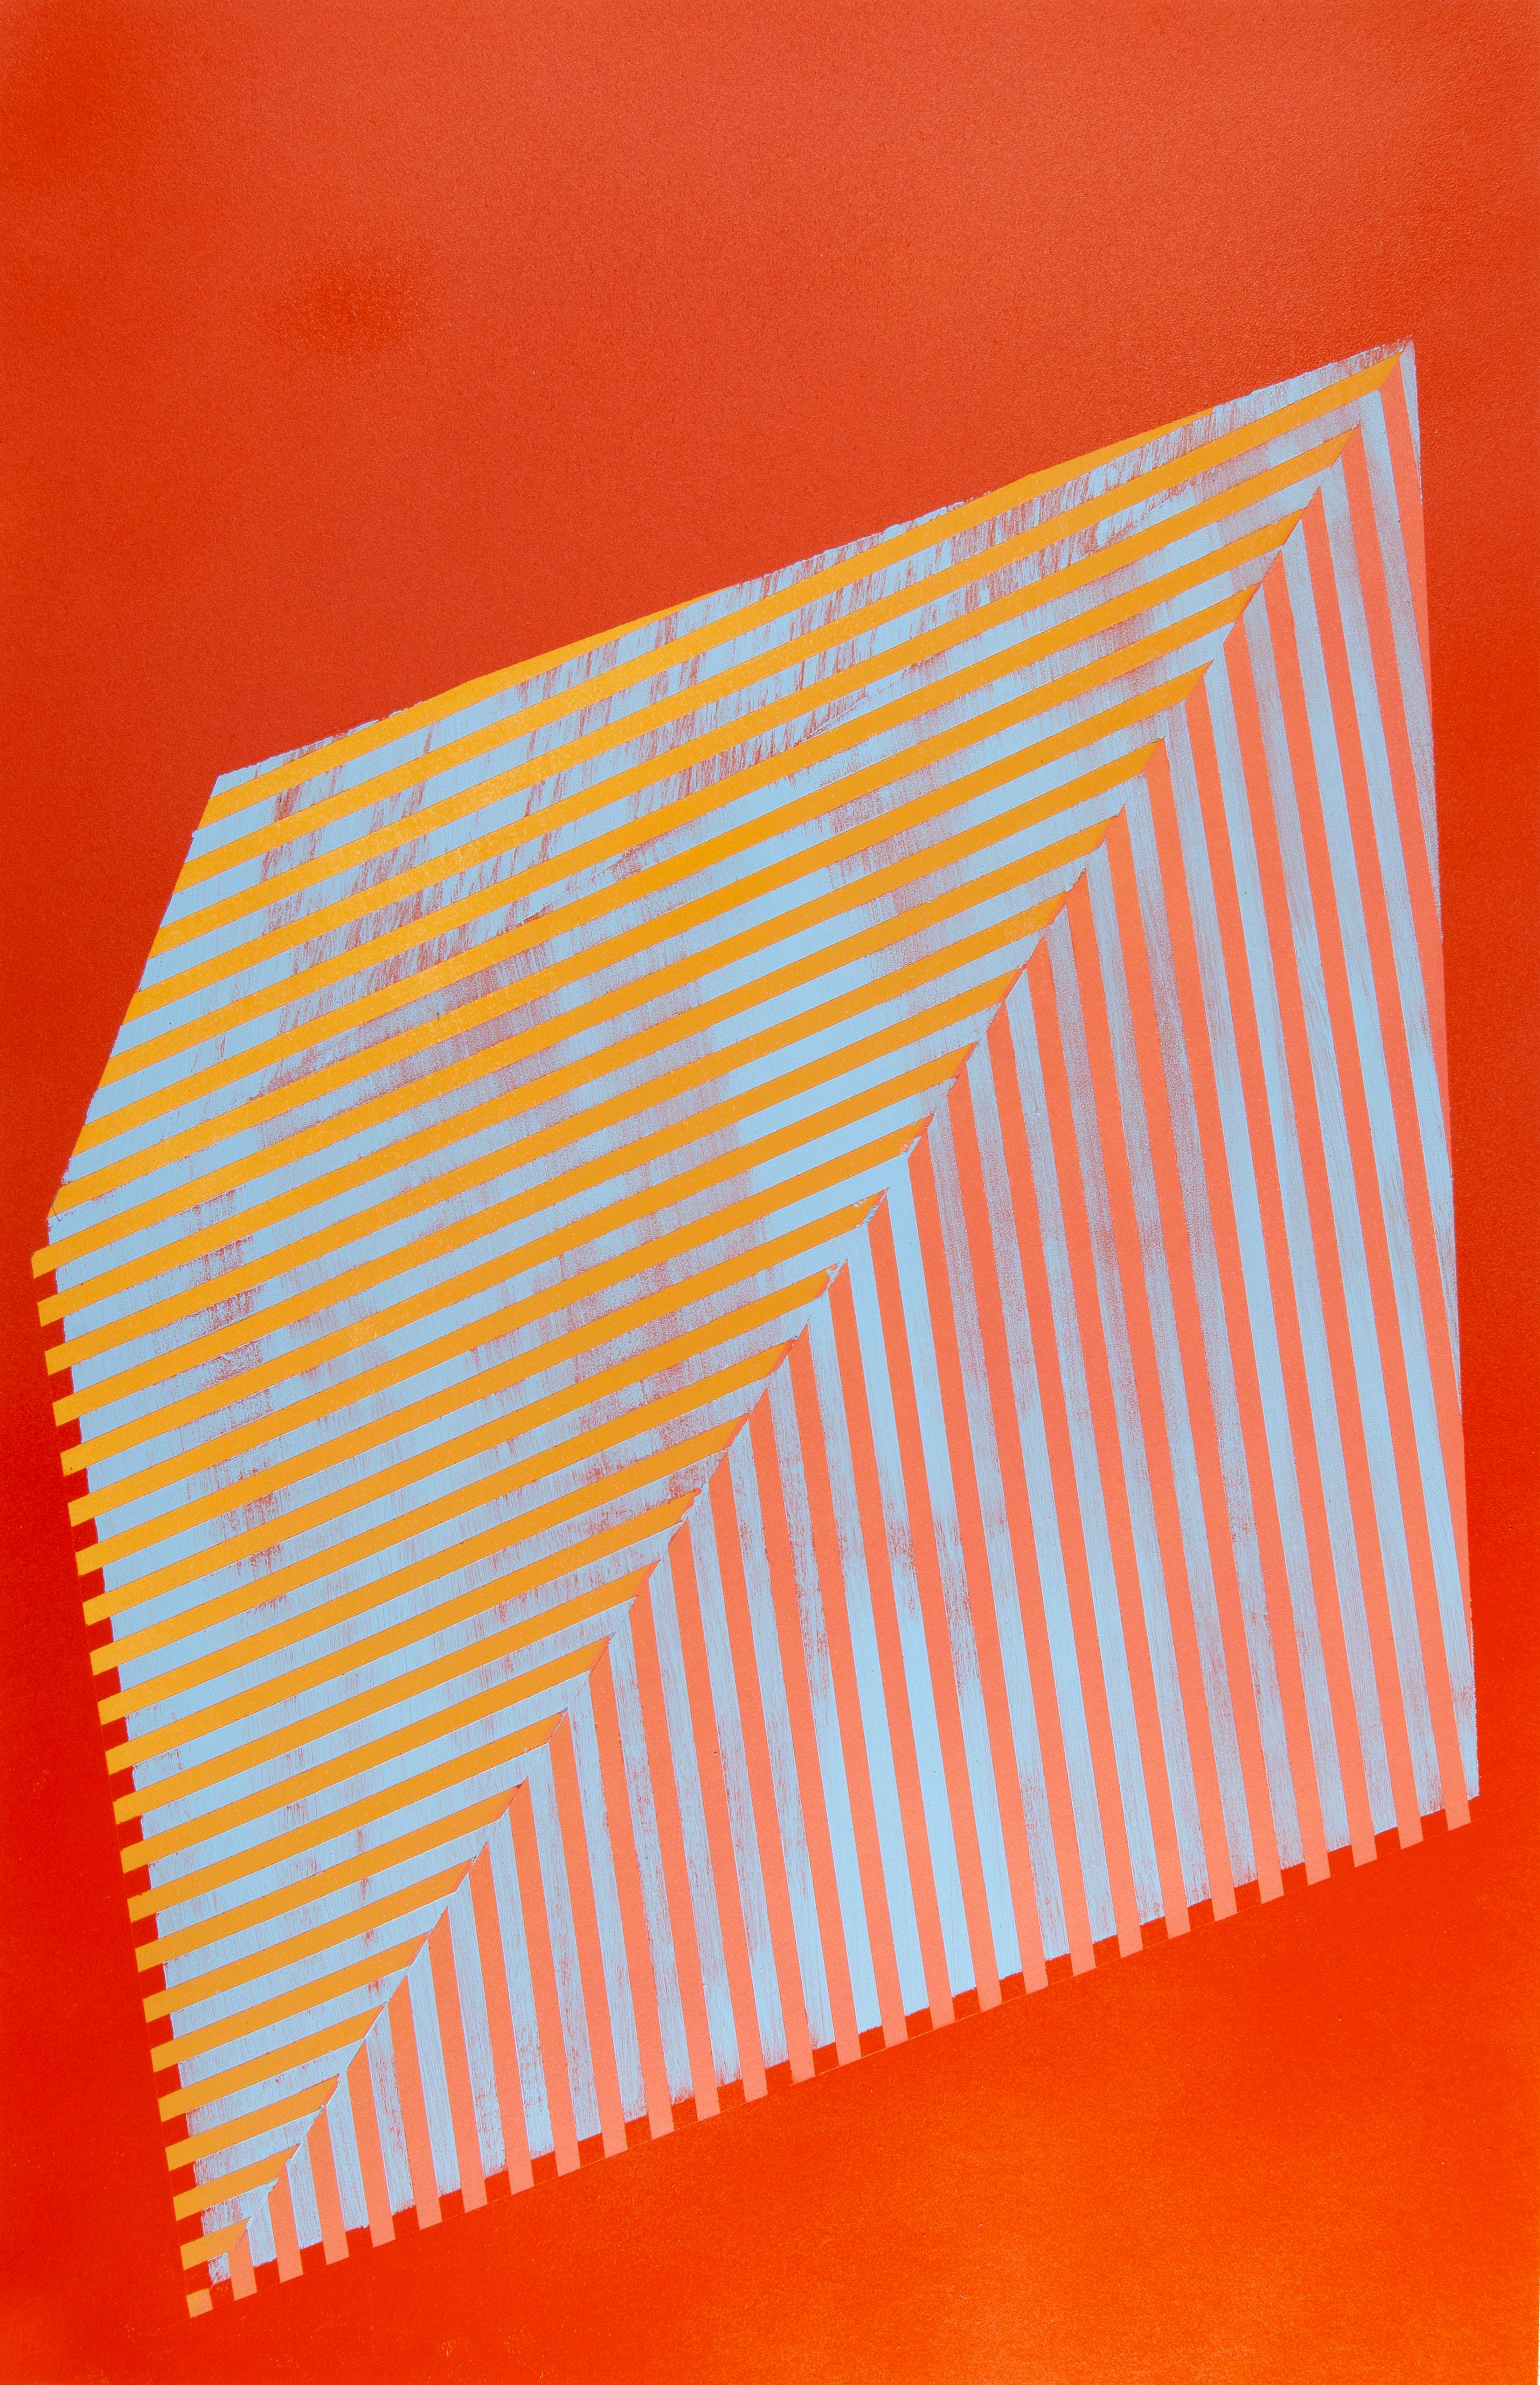 Prismatic Polygon XV: geometric abstract painting w/ linear pattern, red, orange